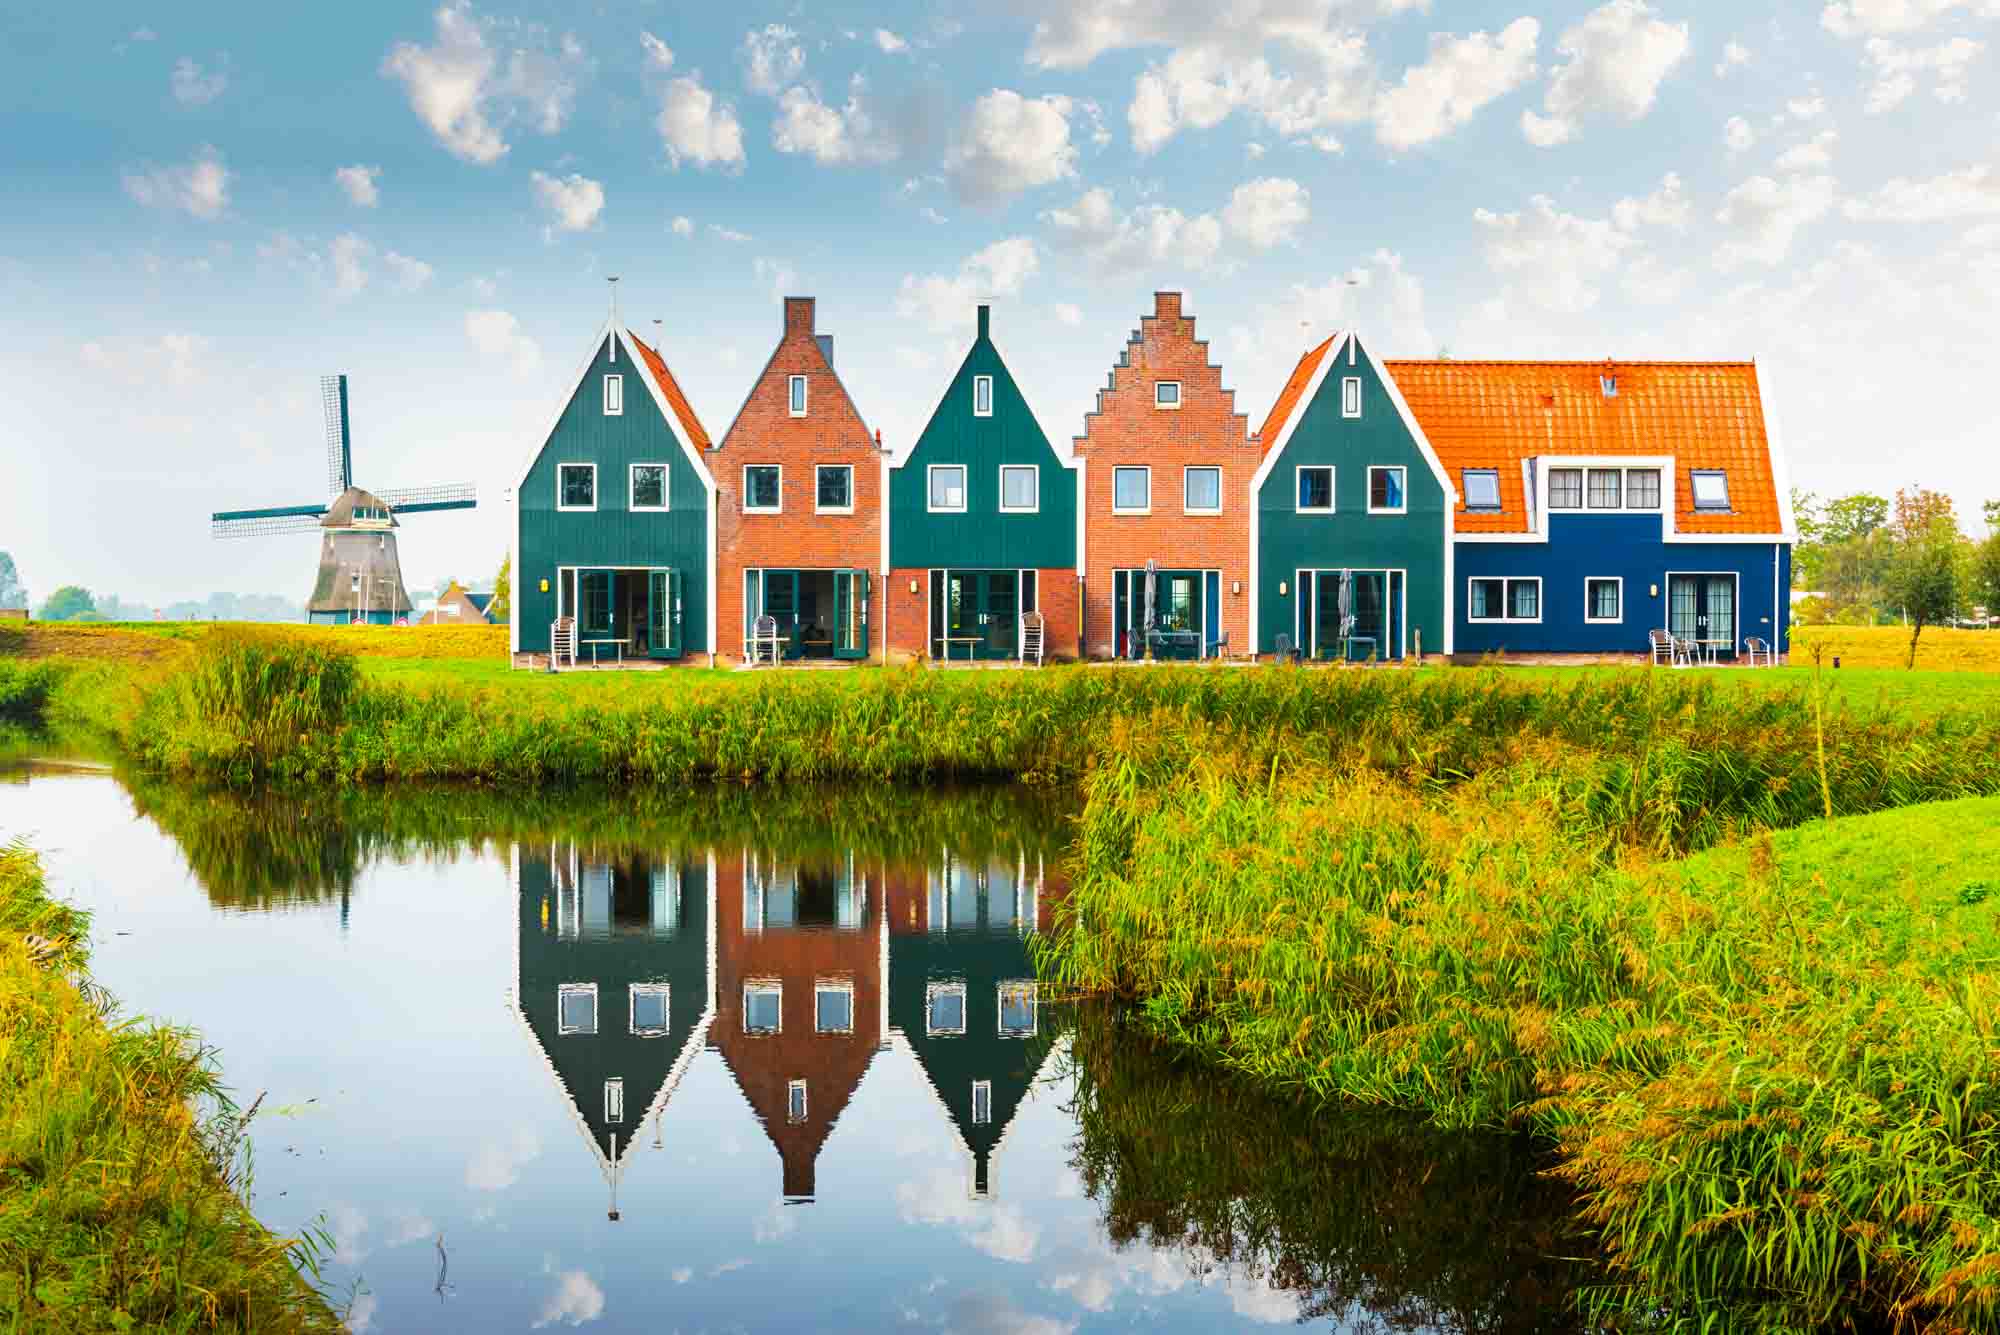 The Netherlands is famous for its cute houses